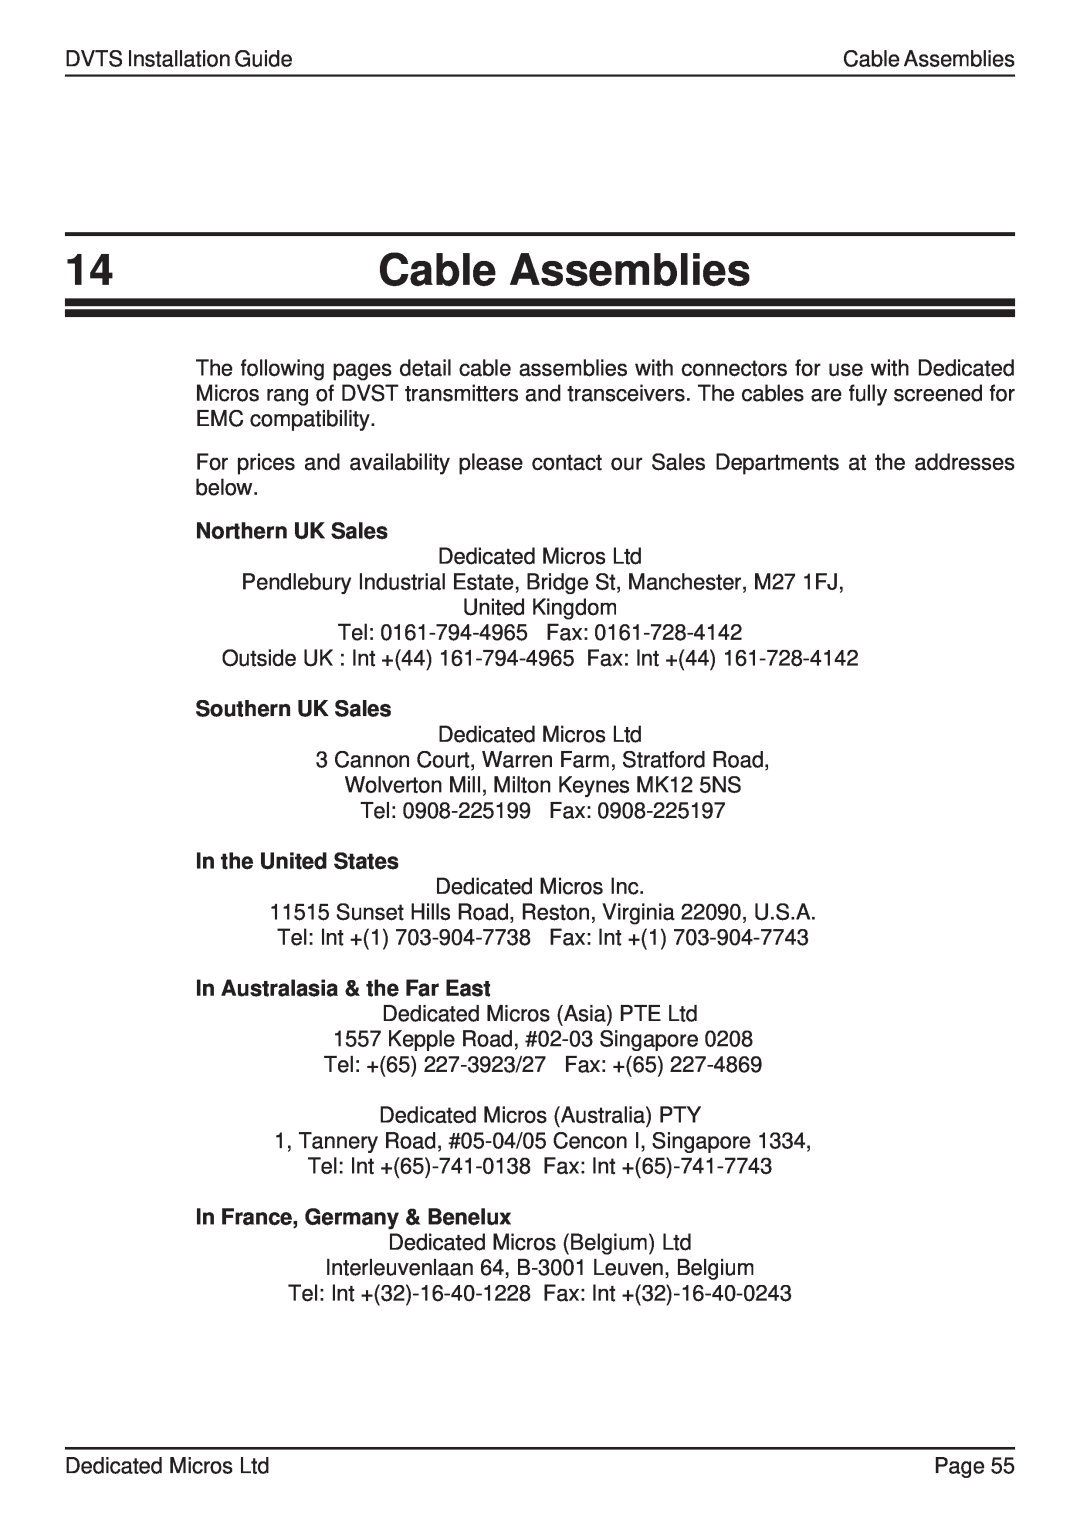 Guardian Technologies DFT 150/175, DVST manual Cable Assemblies, Northern UK Sales, Southern UK Sales, In the United States 